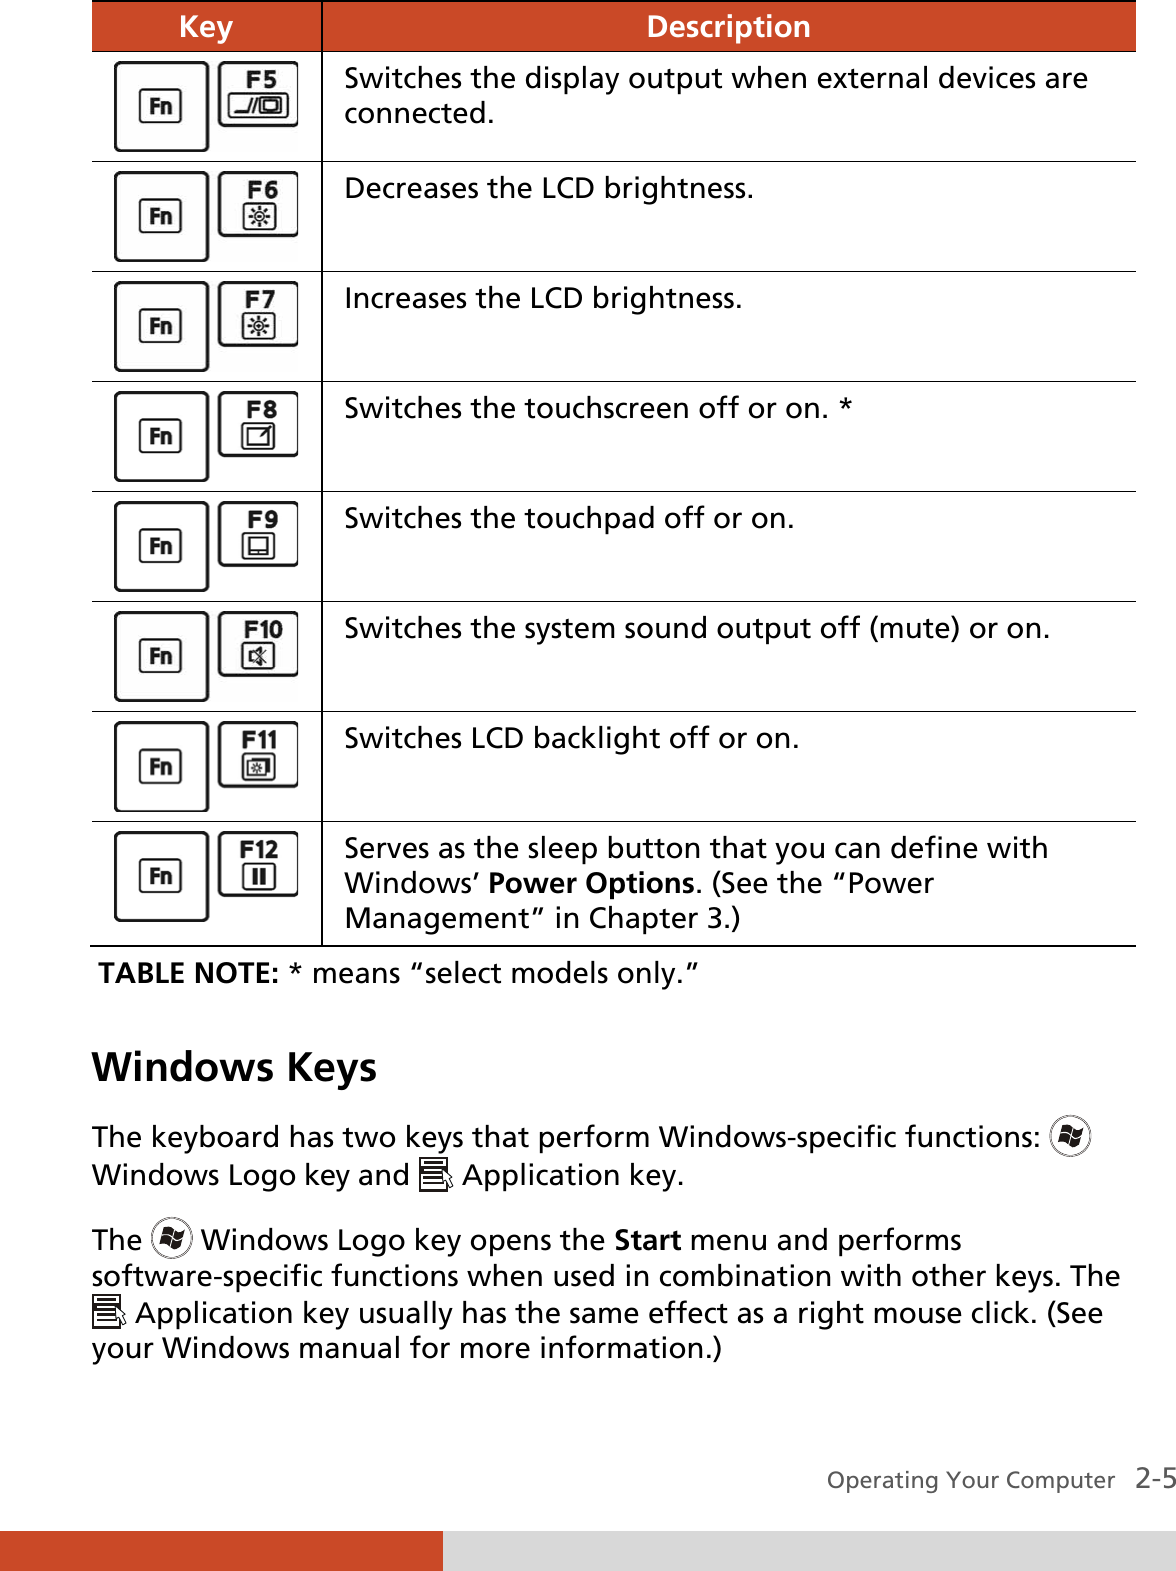  Operating Your Computer   2-5 Key  Description  Switches the display output when external devices are connected.  Decreases the LCD brightness.  Increases the LCD brightness.  Switches the touchscreen off or on. *  Switches the touchpad off or on.  Switches the system sound output off (mute) or on.  Switches LCD backlight off or on.  Serves as the sleep button that you can define with Windows’ Power Options. (See the “Power Management” in Chapter 3.) TABLE NOTE: * means “select models only.”  Windows Keys The keyboard has two keys that perform Windows-specific functions:   Windows Logo key and   Application key. The   Windows Logo key opens the Start menu and performs software-specific functions when used in combination with other keys. The  Application key usually has the same effect as a right mouse click. (See your Windows manual for more information.) 